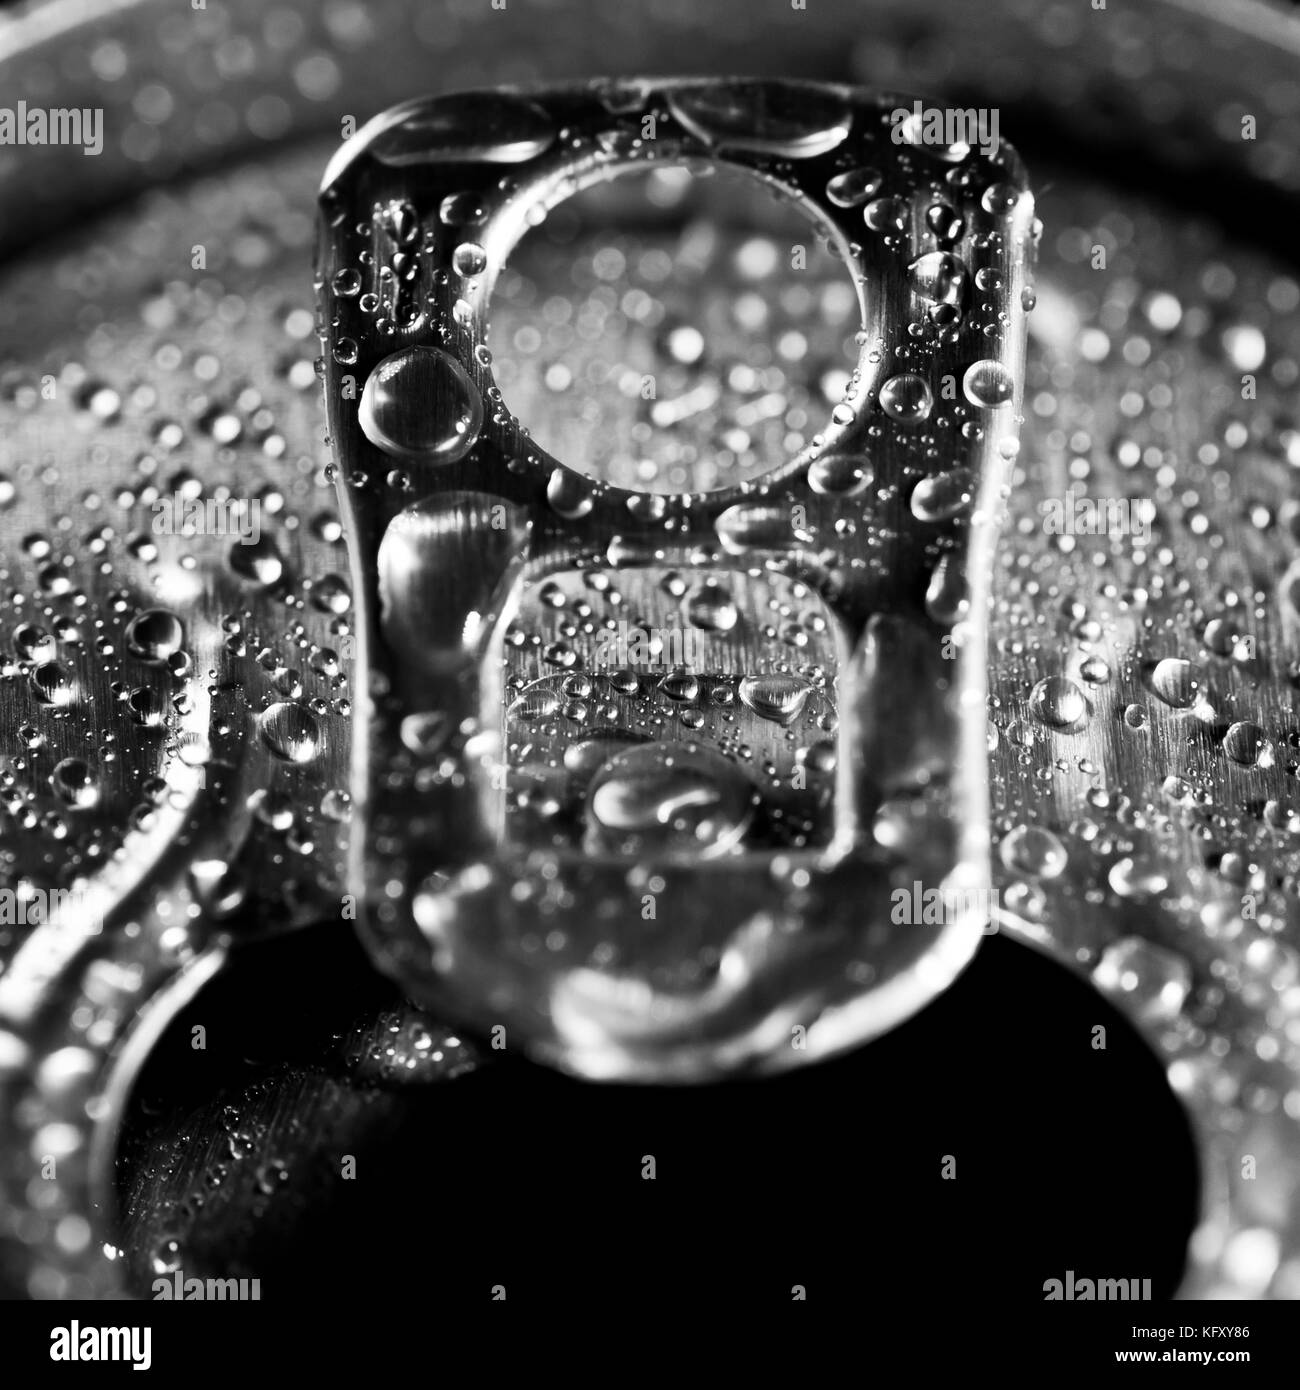 The ring pull of a soft drinks can that's been covered in water droplets. Stock Photo